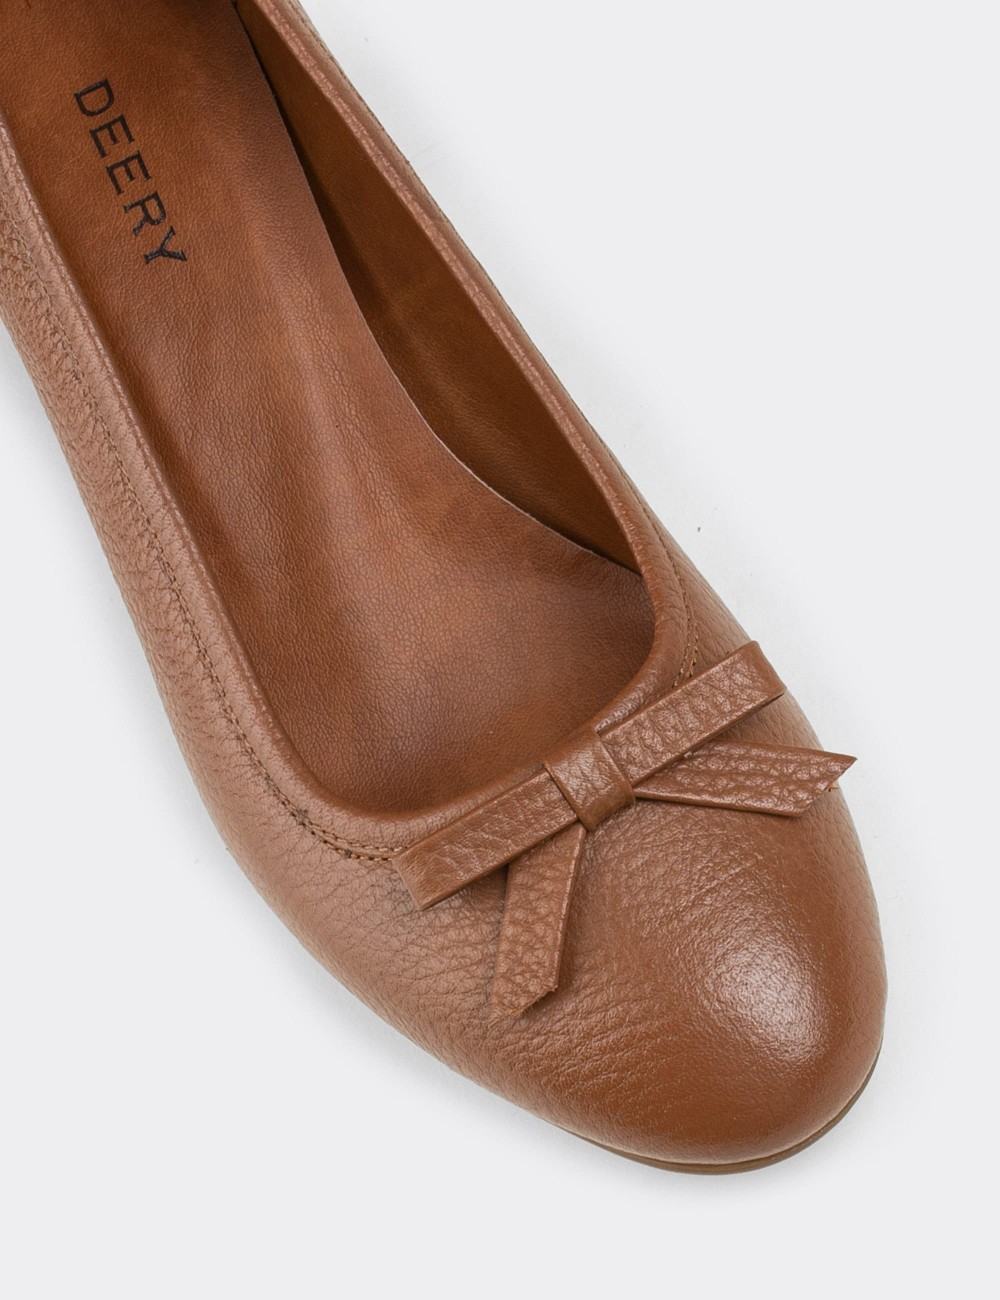 Tan  Leather Lace-up Shoes - E1471ZTBAC02